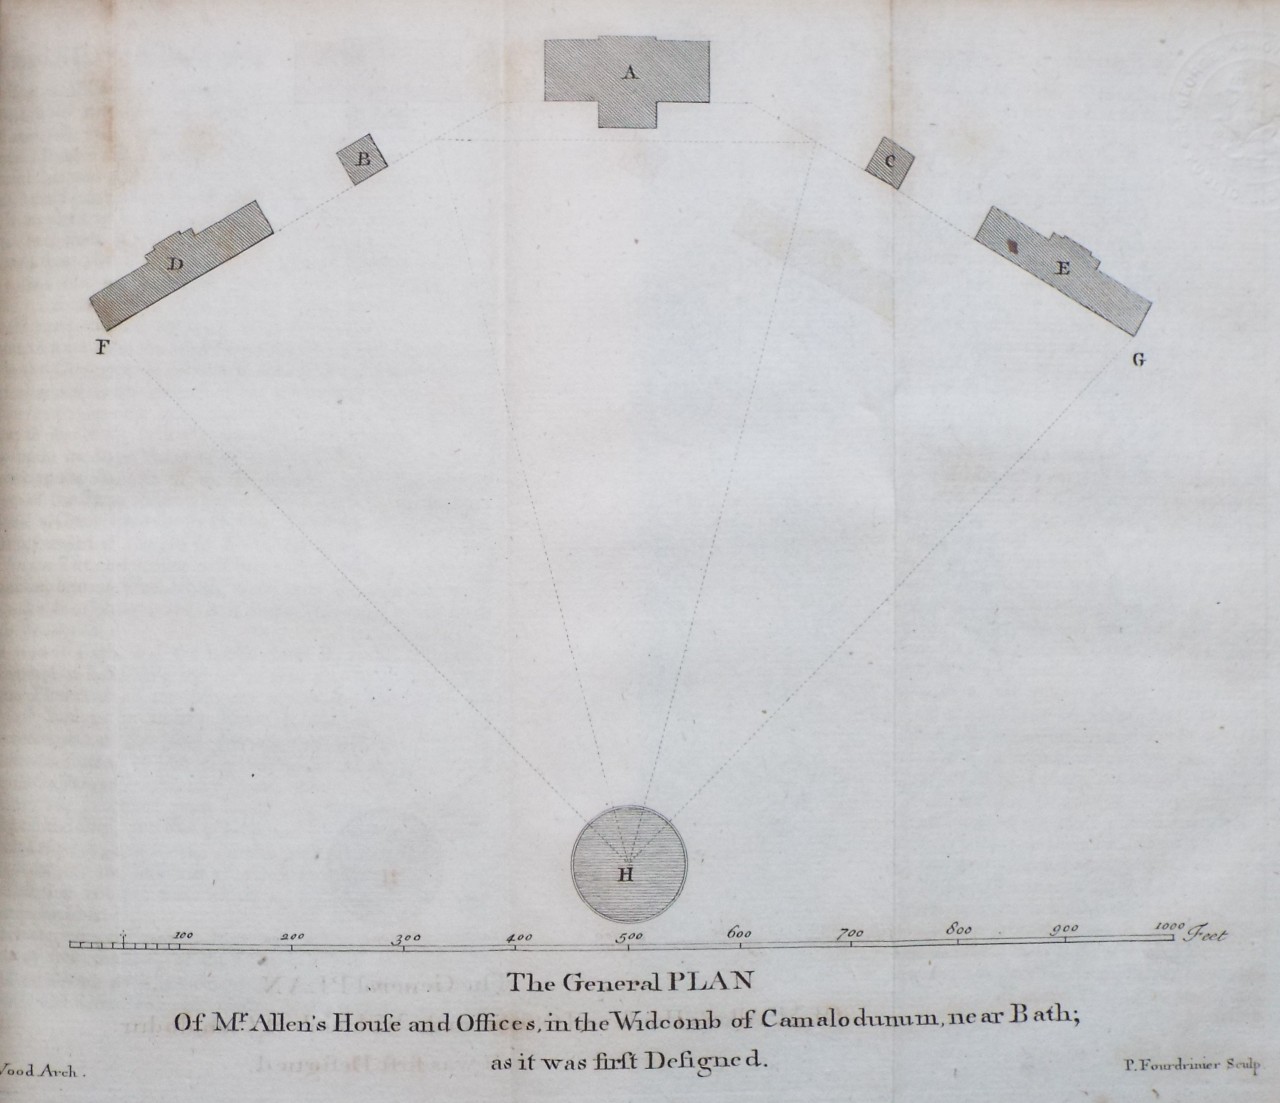 Print - The General Plan Of Mr. Allen's House and Offices, in the Widcomb of Camalodonum, near Bath; as it was first Designed. - Fourdrinier